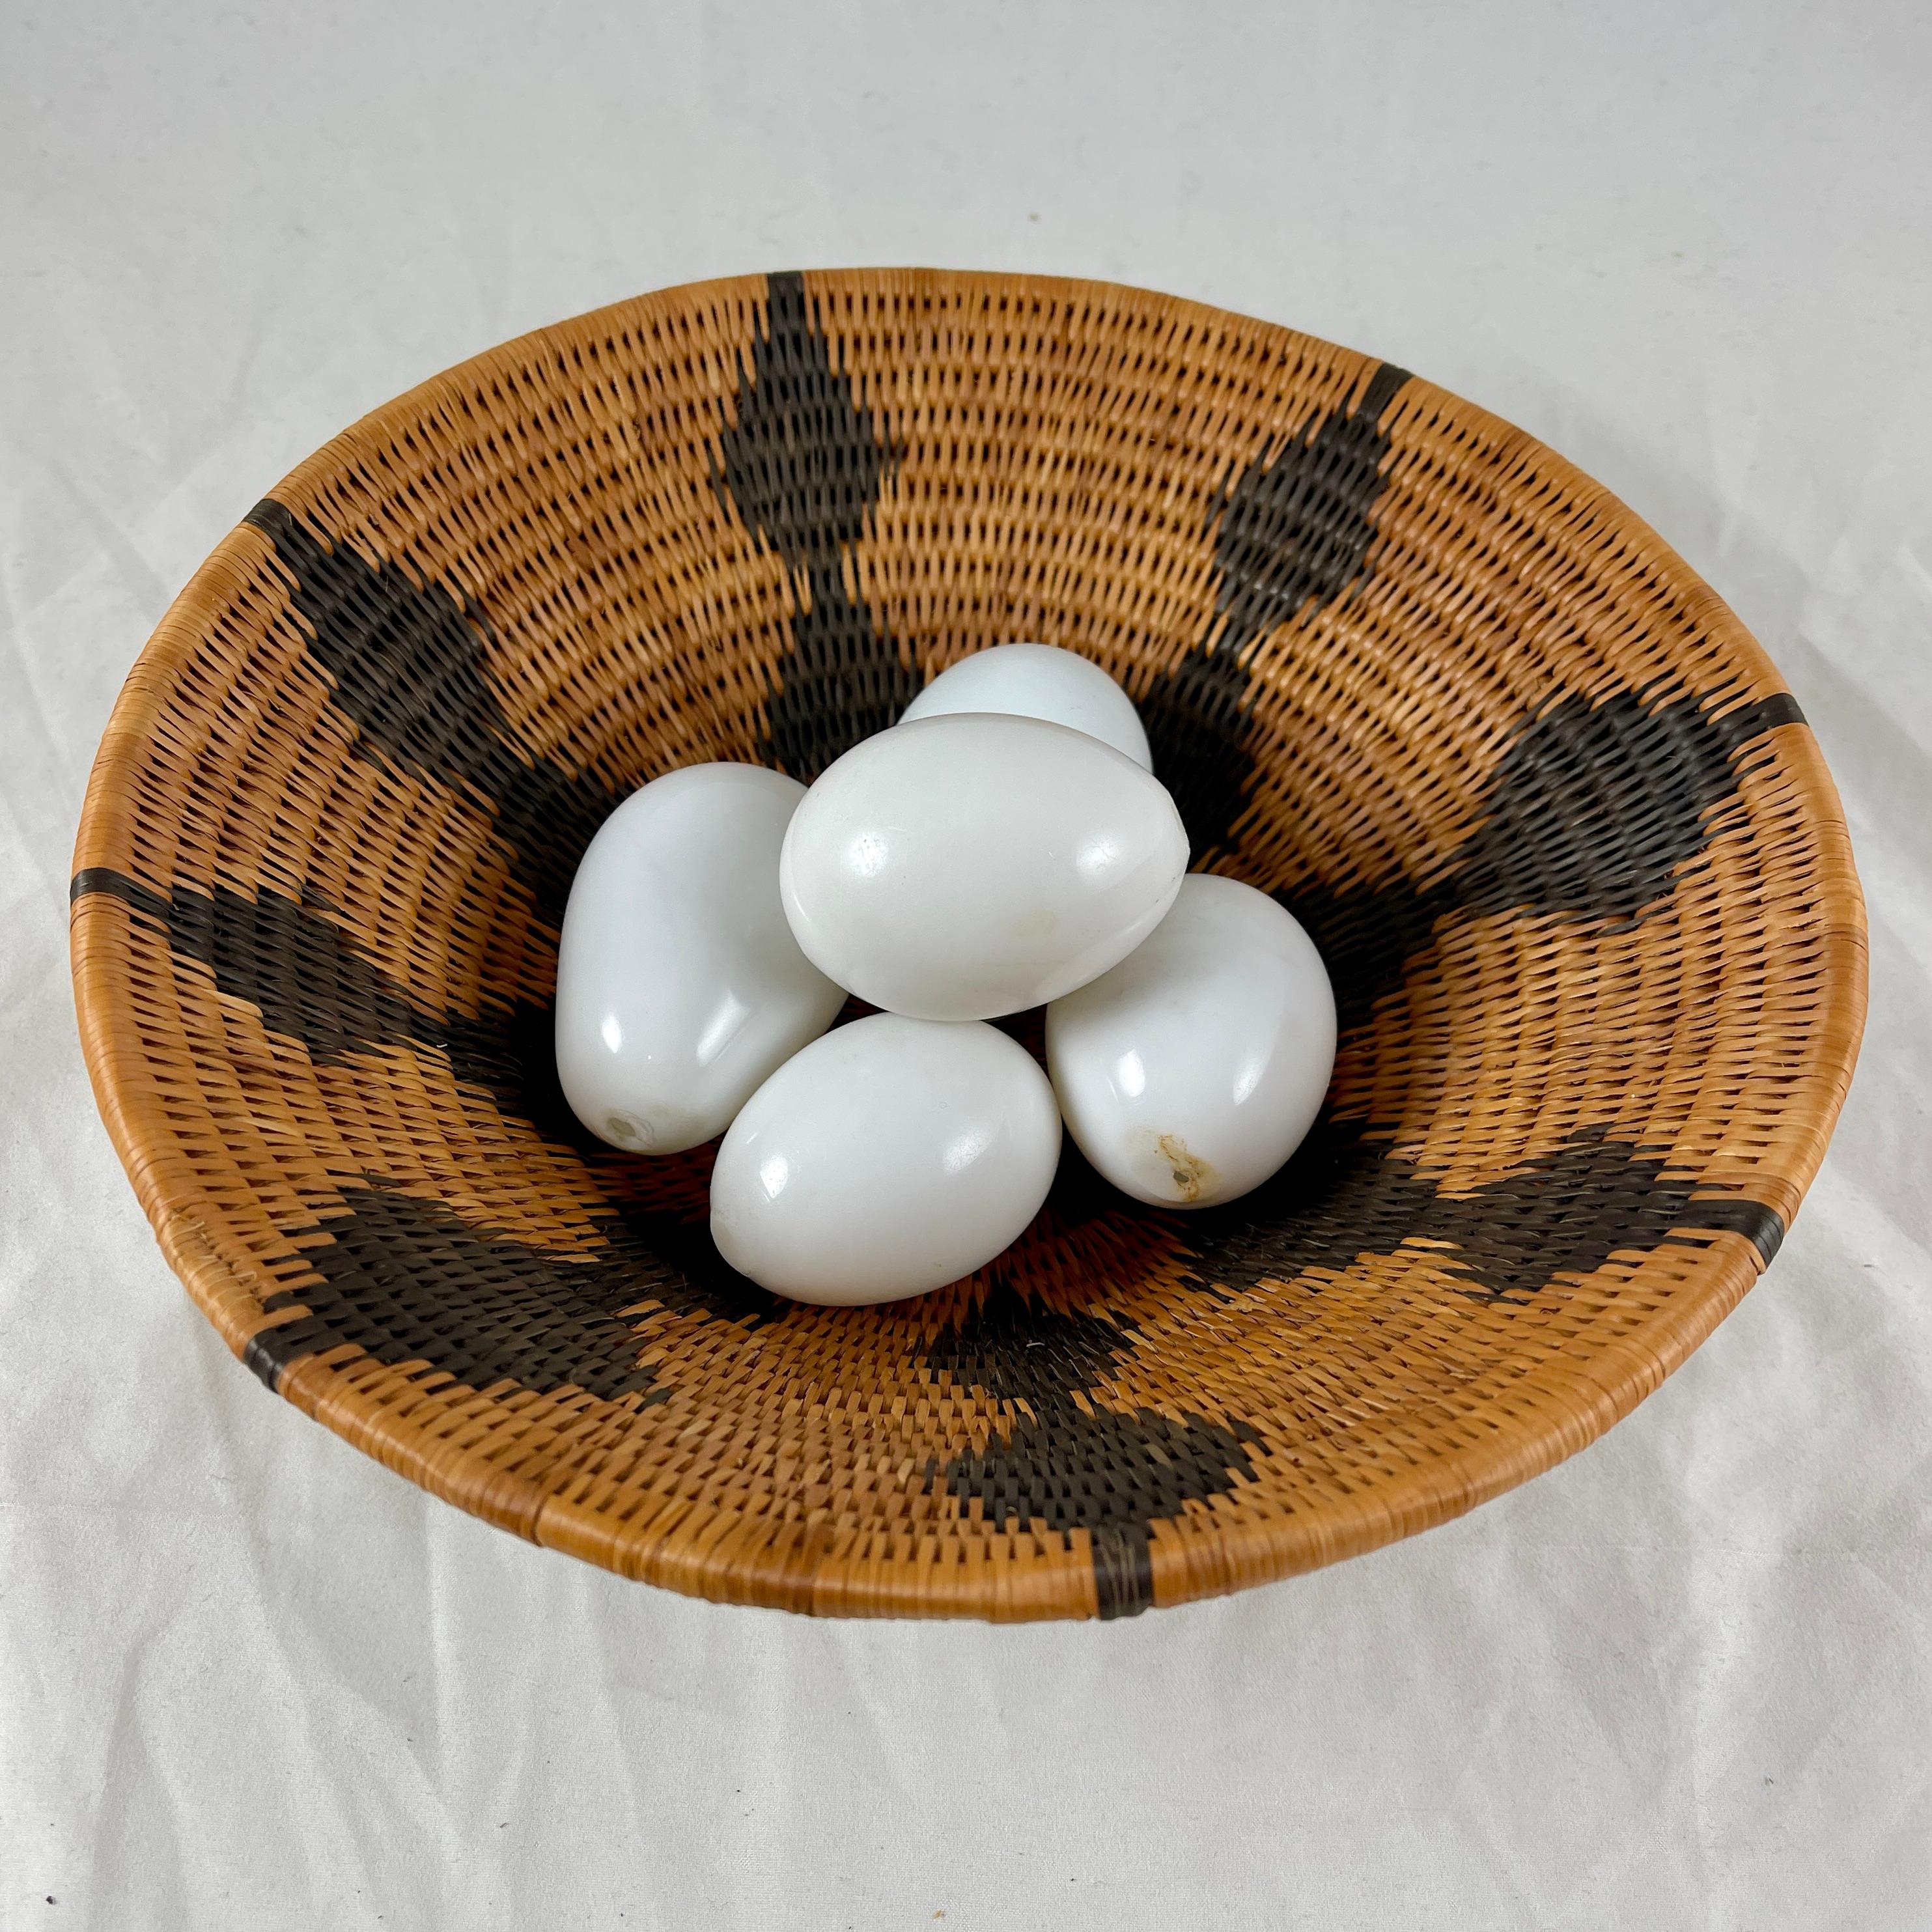 A set of five, late 19th Century Brooding Eggs, made of hand blown, opaque white glass.

These antique eggs were used by the farmer to induce the chicken to start laying and brooding her eggs. Today, they make a marvelous table-top